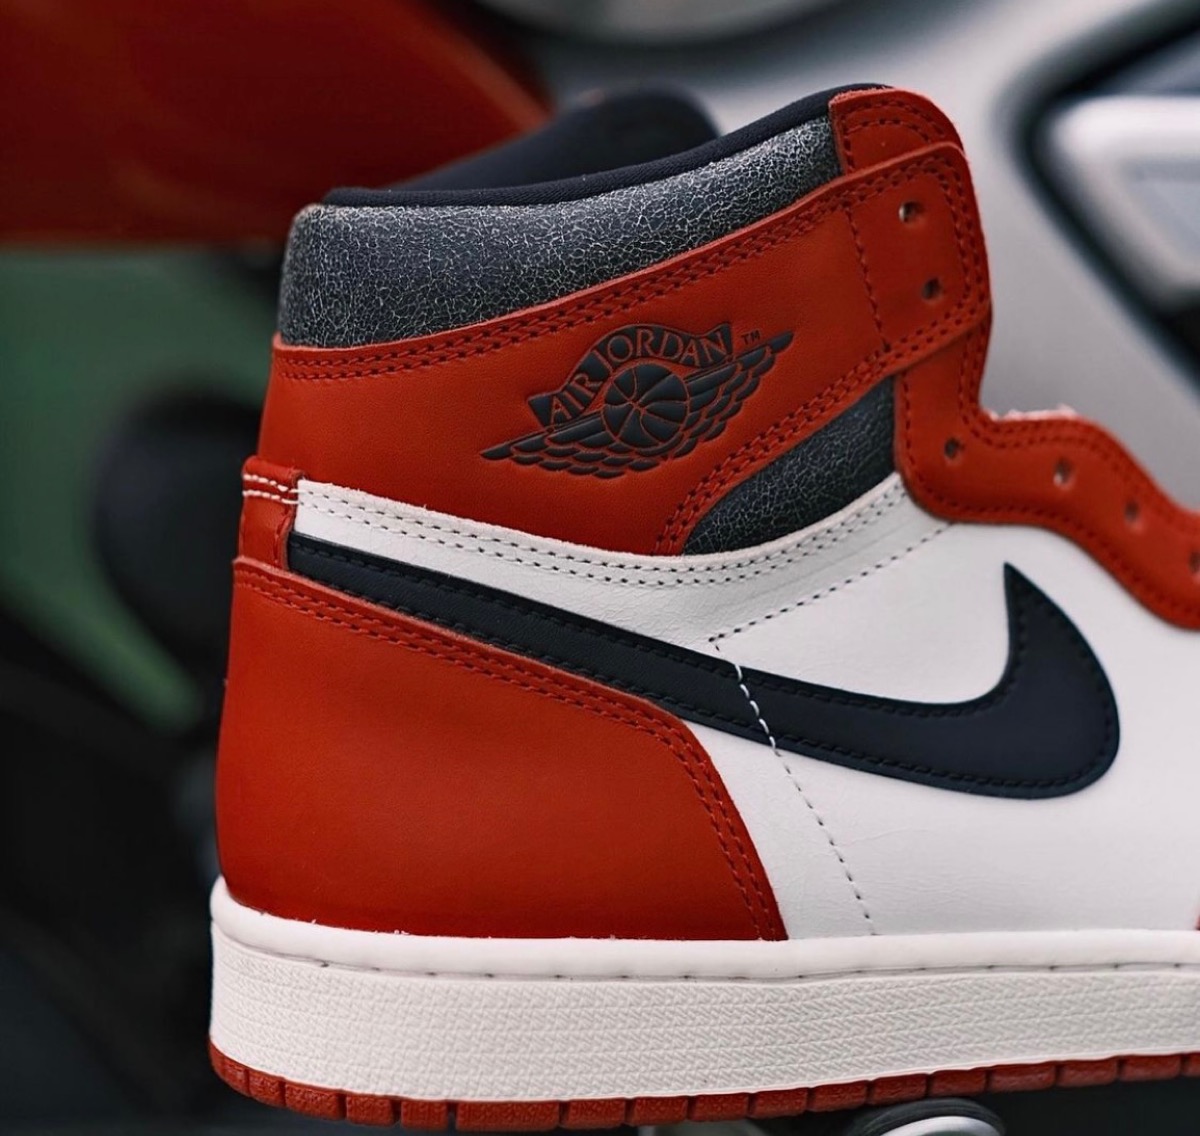 Chicagoをヴィンテージ風に仕上げたNike Air Jordan High OG “Lost and Found”が国内4月8日に再販予定  UP TO DATE